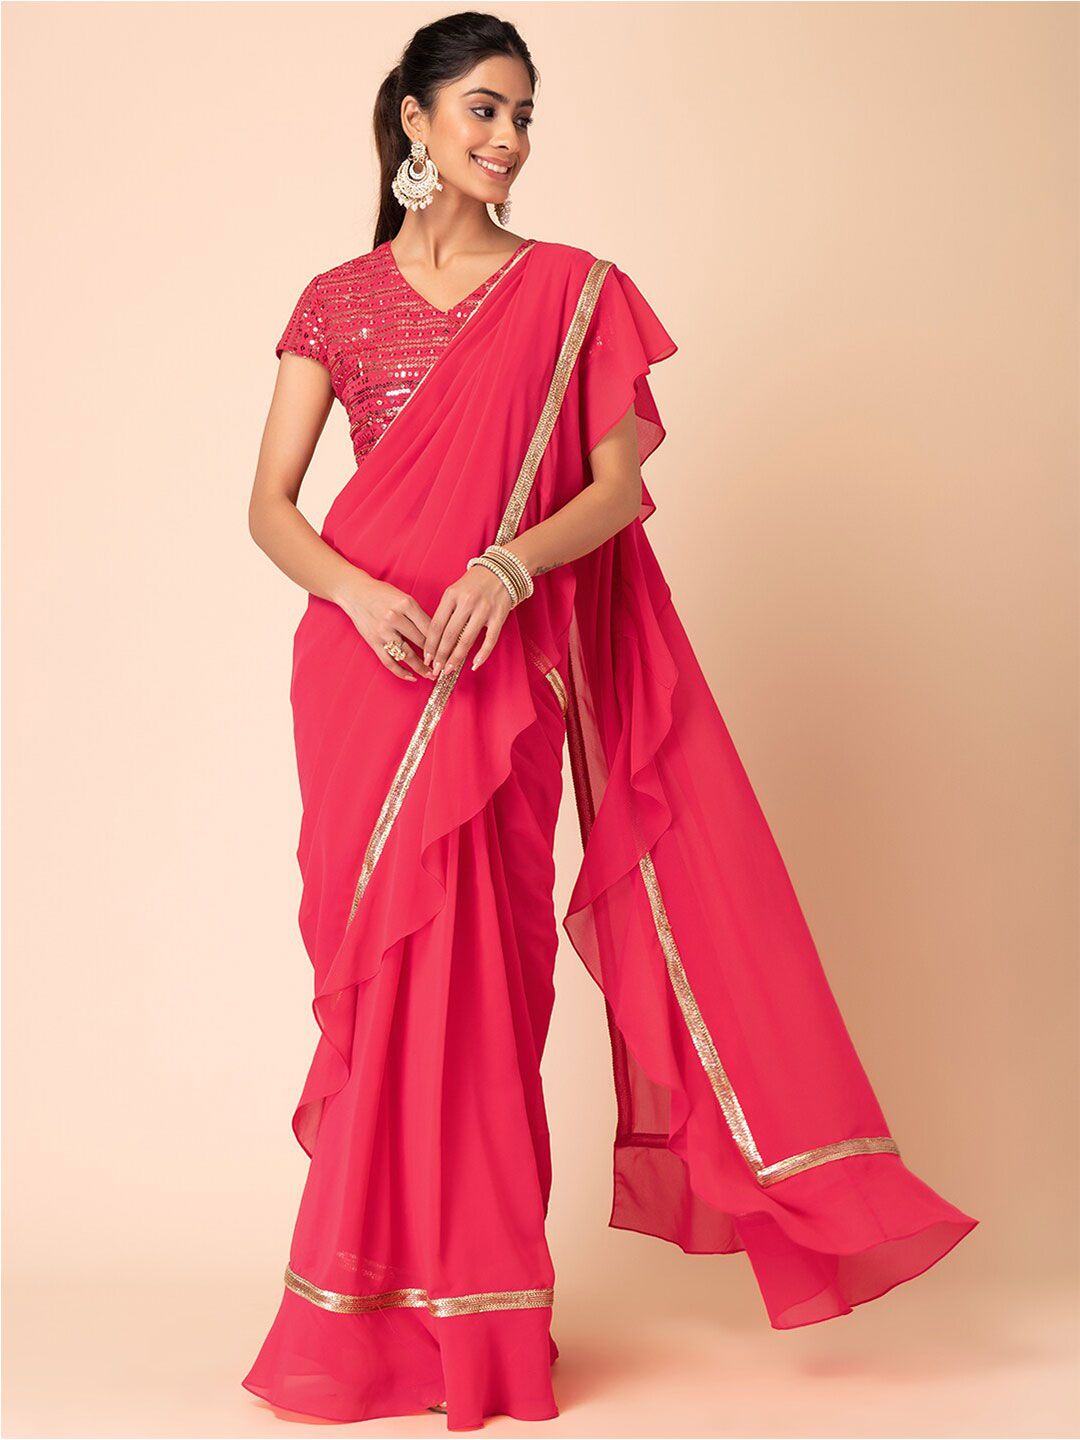 Hot Pink Pre-Stitched Saree Price in India